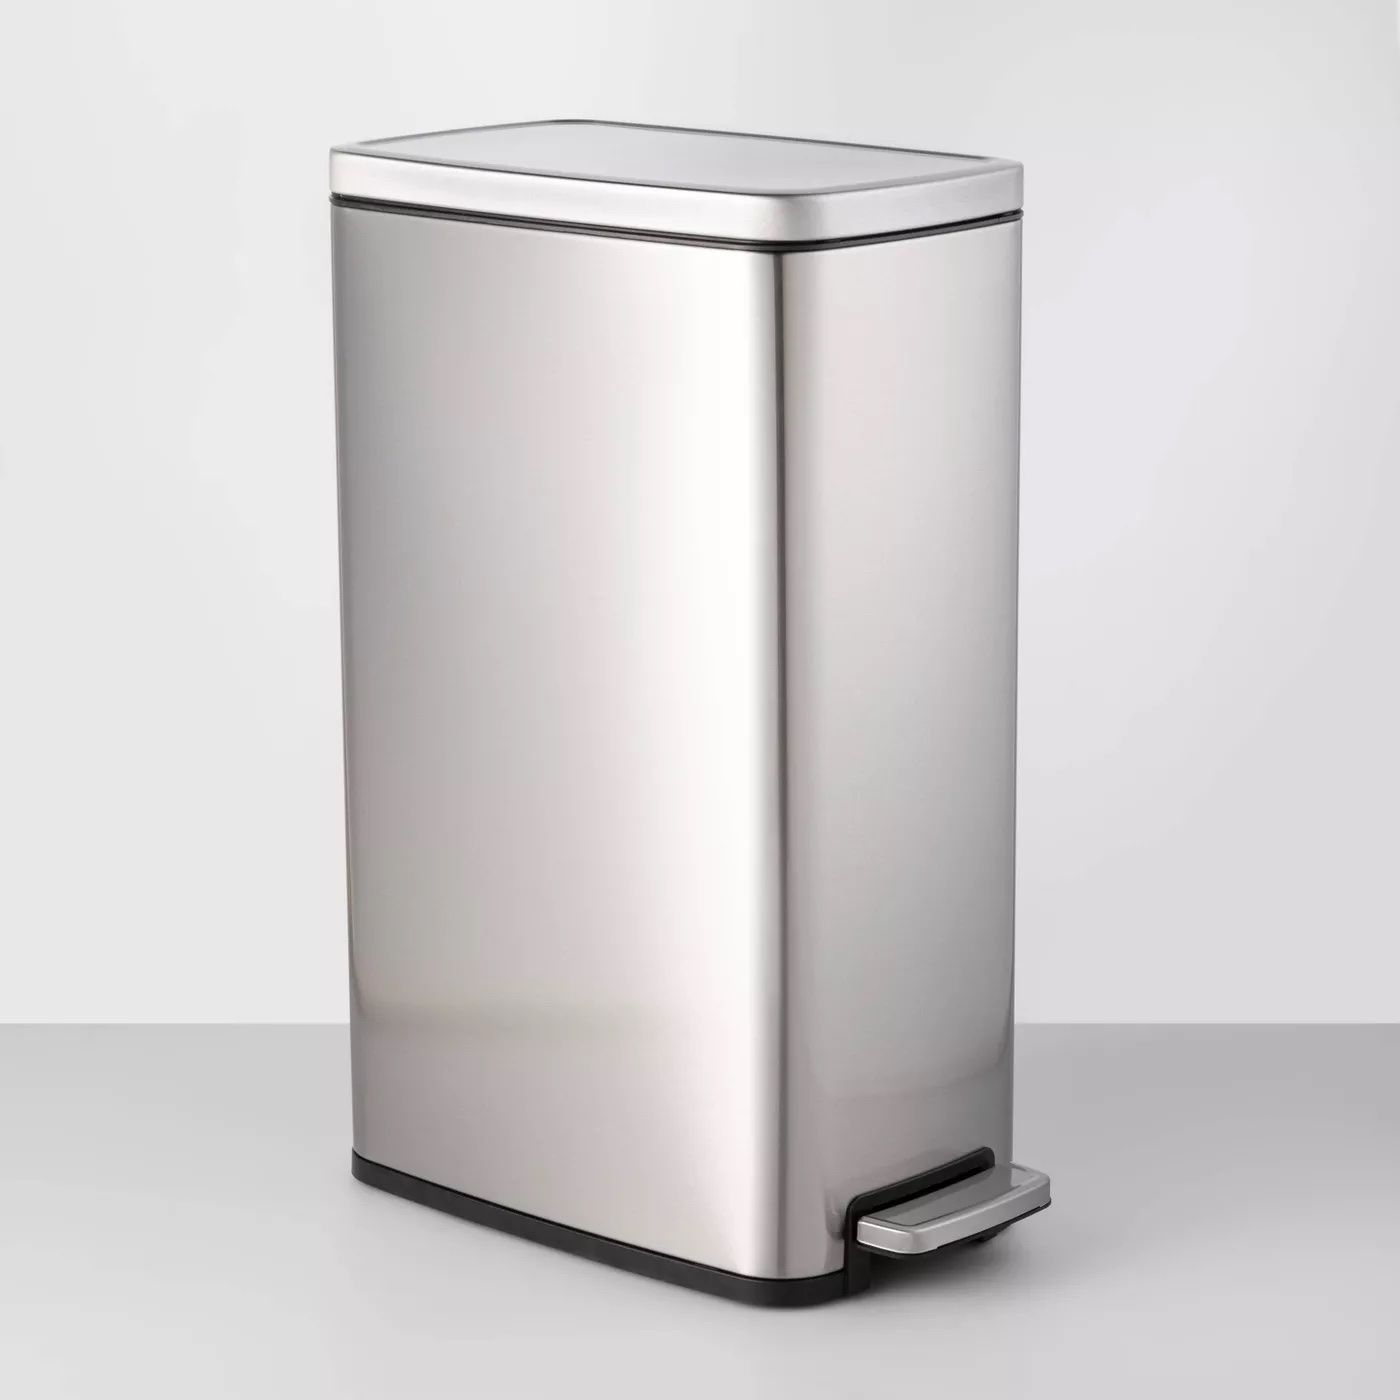 45L Slim Step Trash Can - Made By Design™